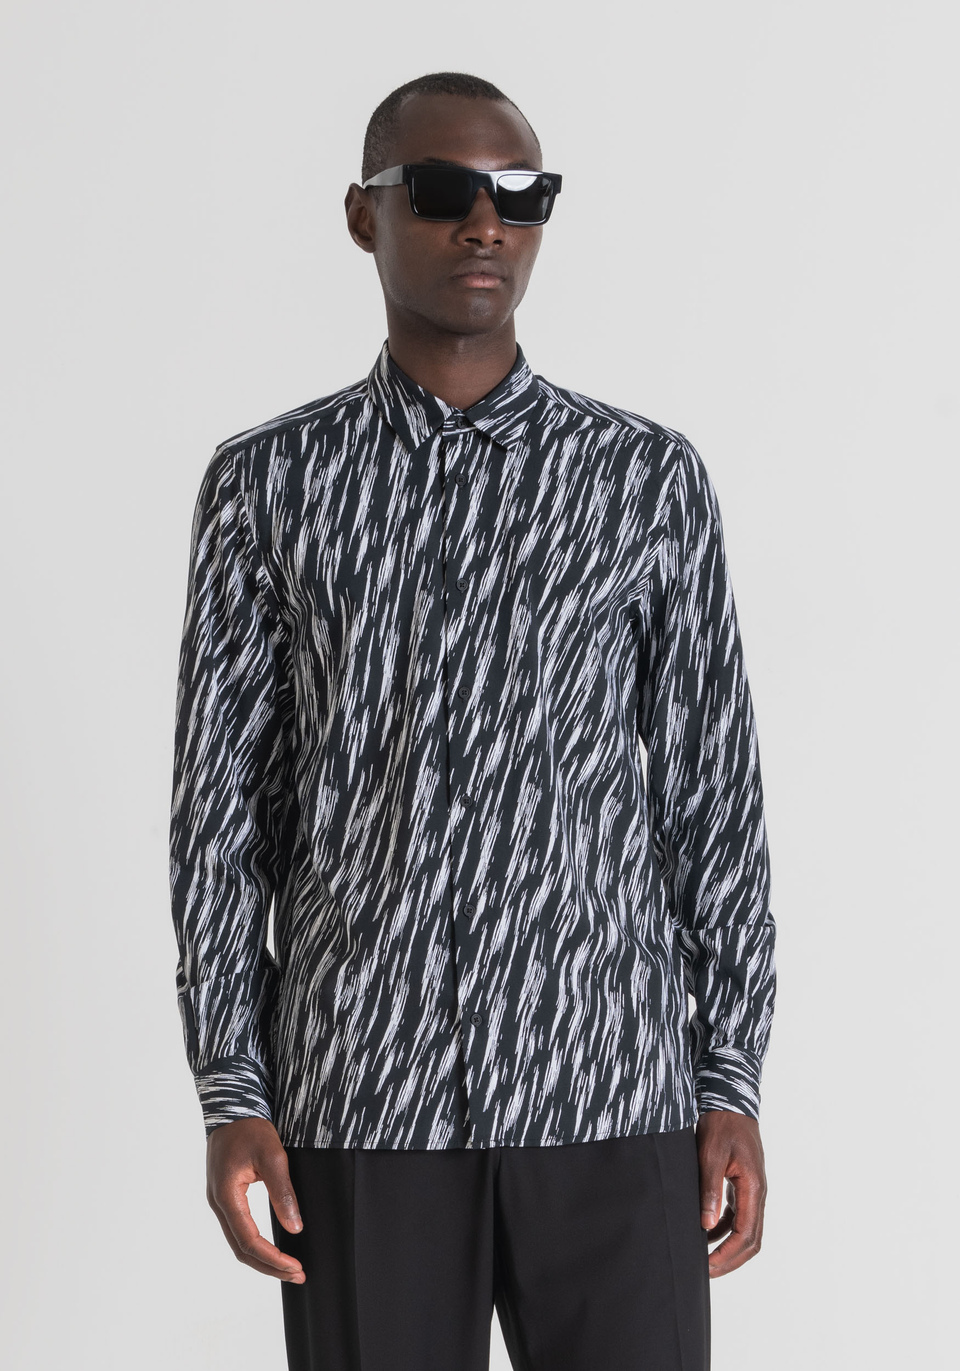 "BARCELONA" REGULAR FIT SHIRT IN PRINTED SOFT-TOUCH COTTON - Antony Morato Online Shop